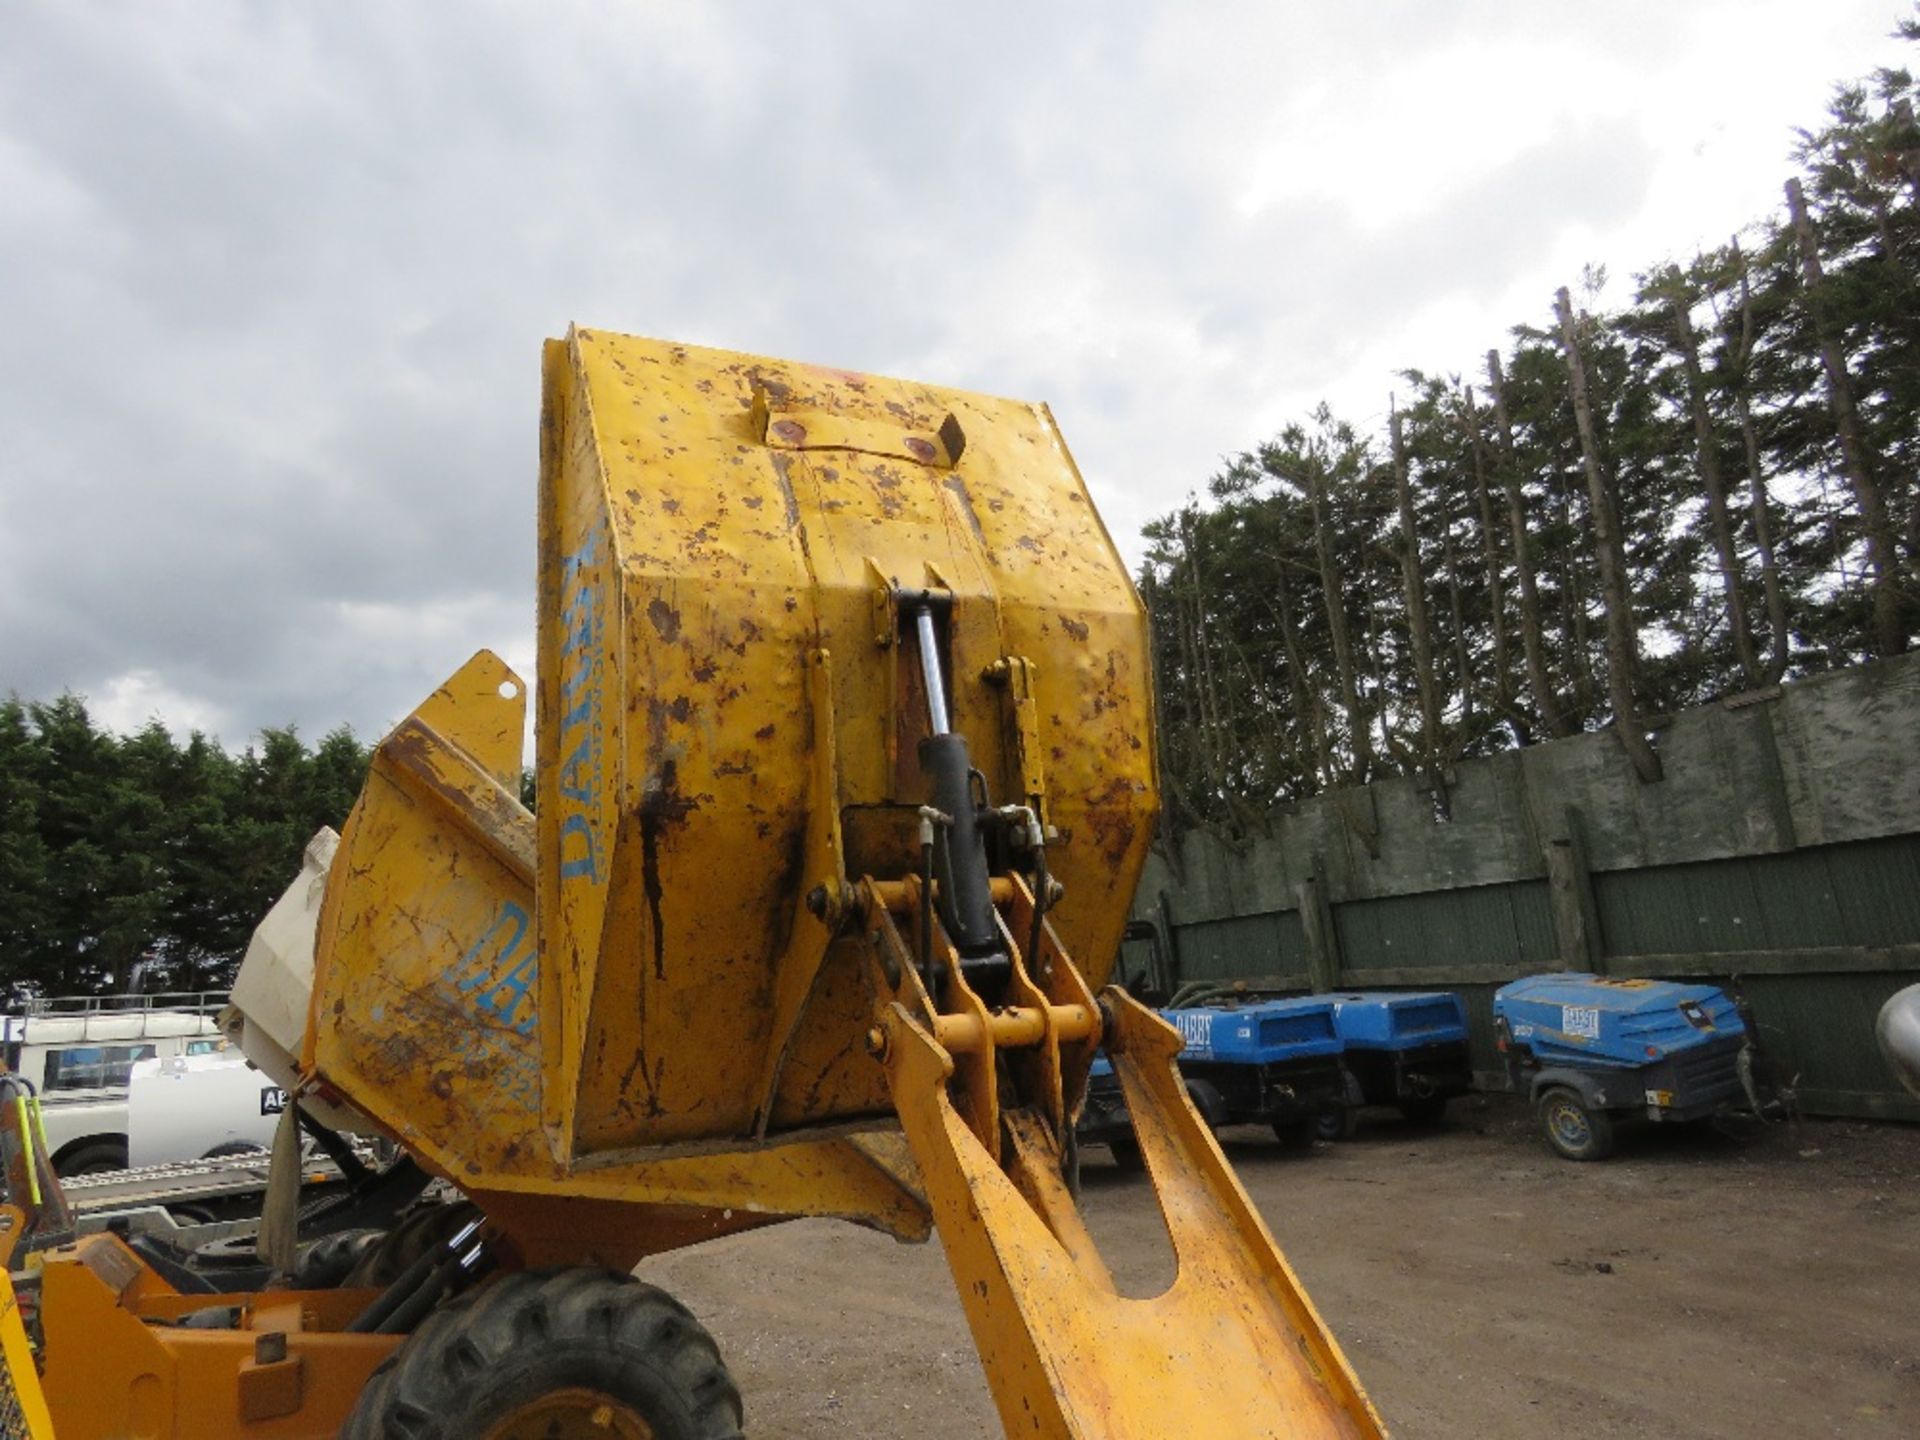 THWAITES 1 TONNE HIGH TIP DUMPER, 2500 REC HOURS. SN:SLCM201ZZ502A6121. WHEN TESTED WAS SEEN TO DRI - Image 8 of 9